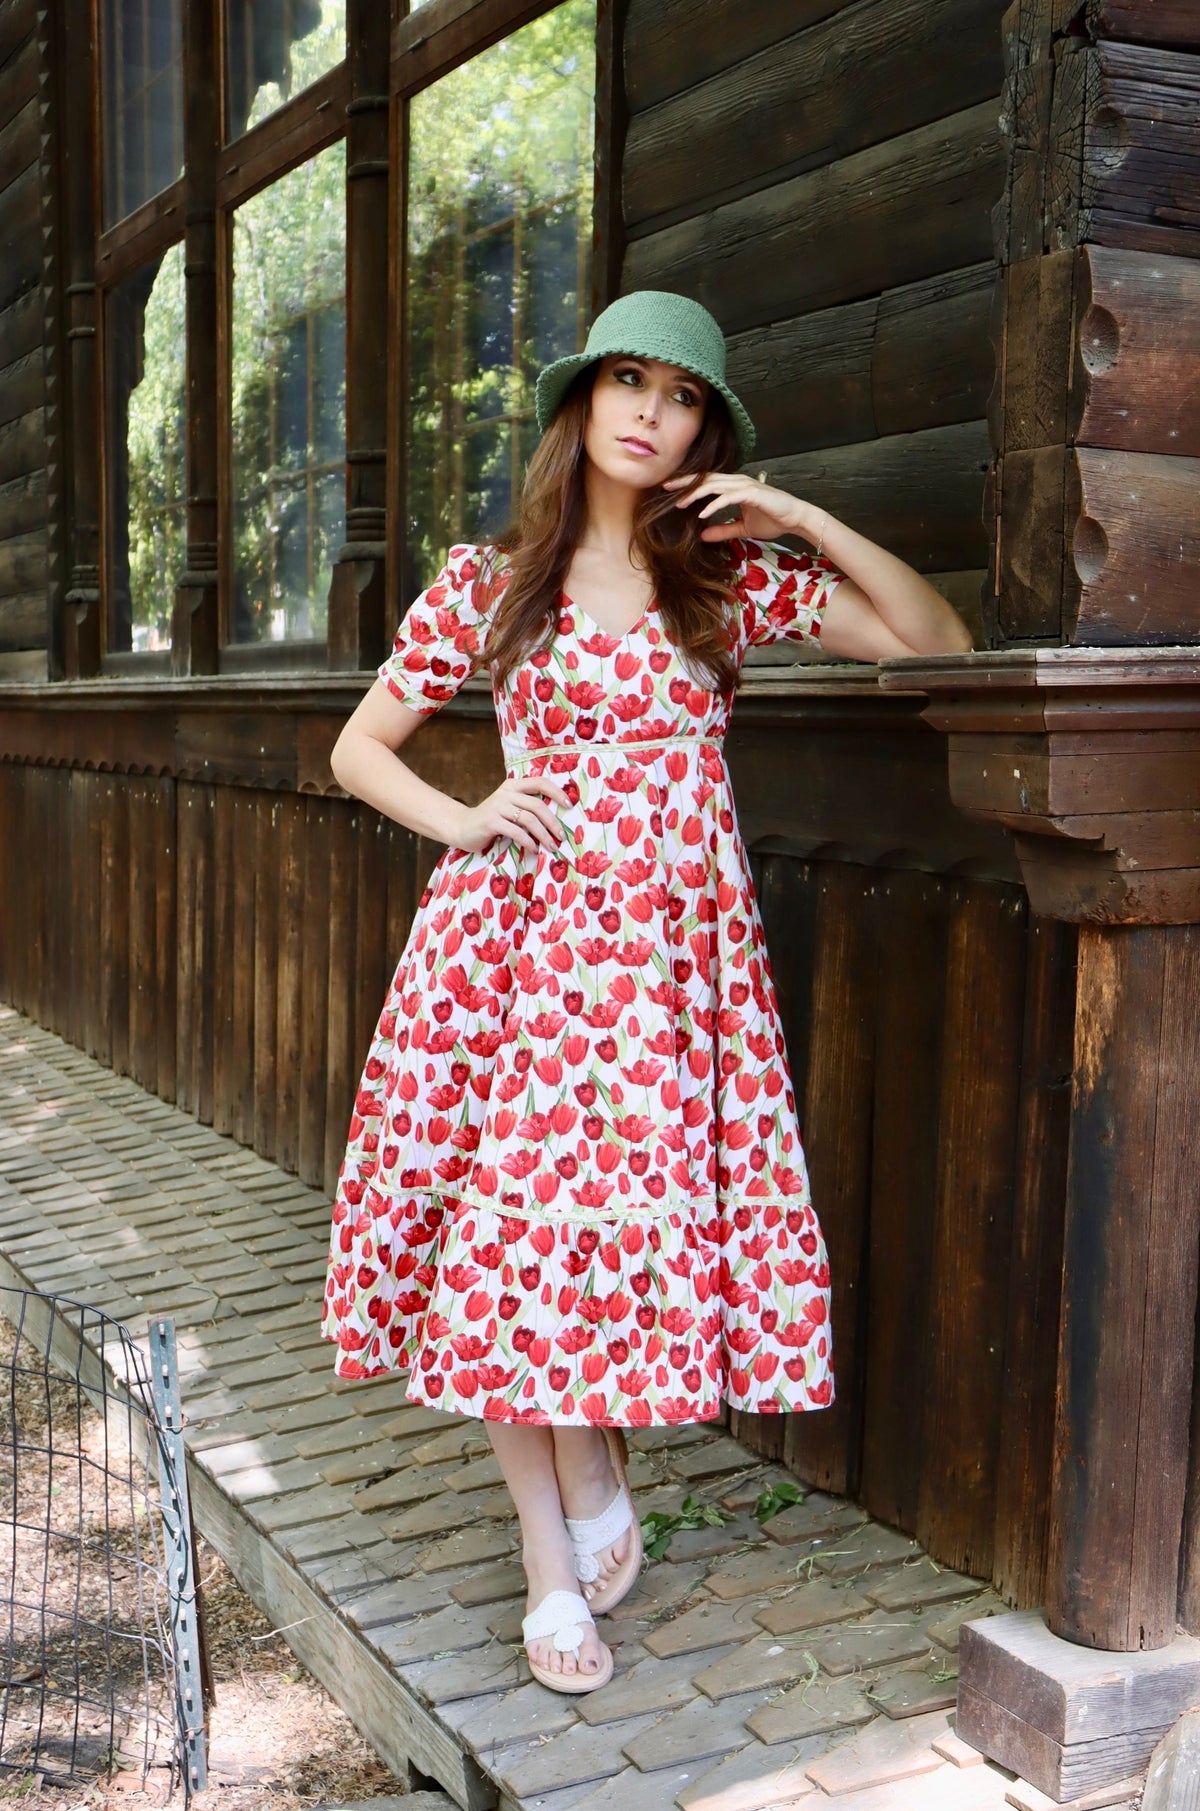 Model wearing midi length dress with a tulip print on white and wearing a green hat against a log cabin.